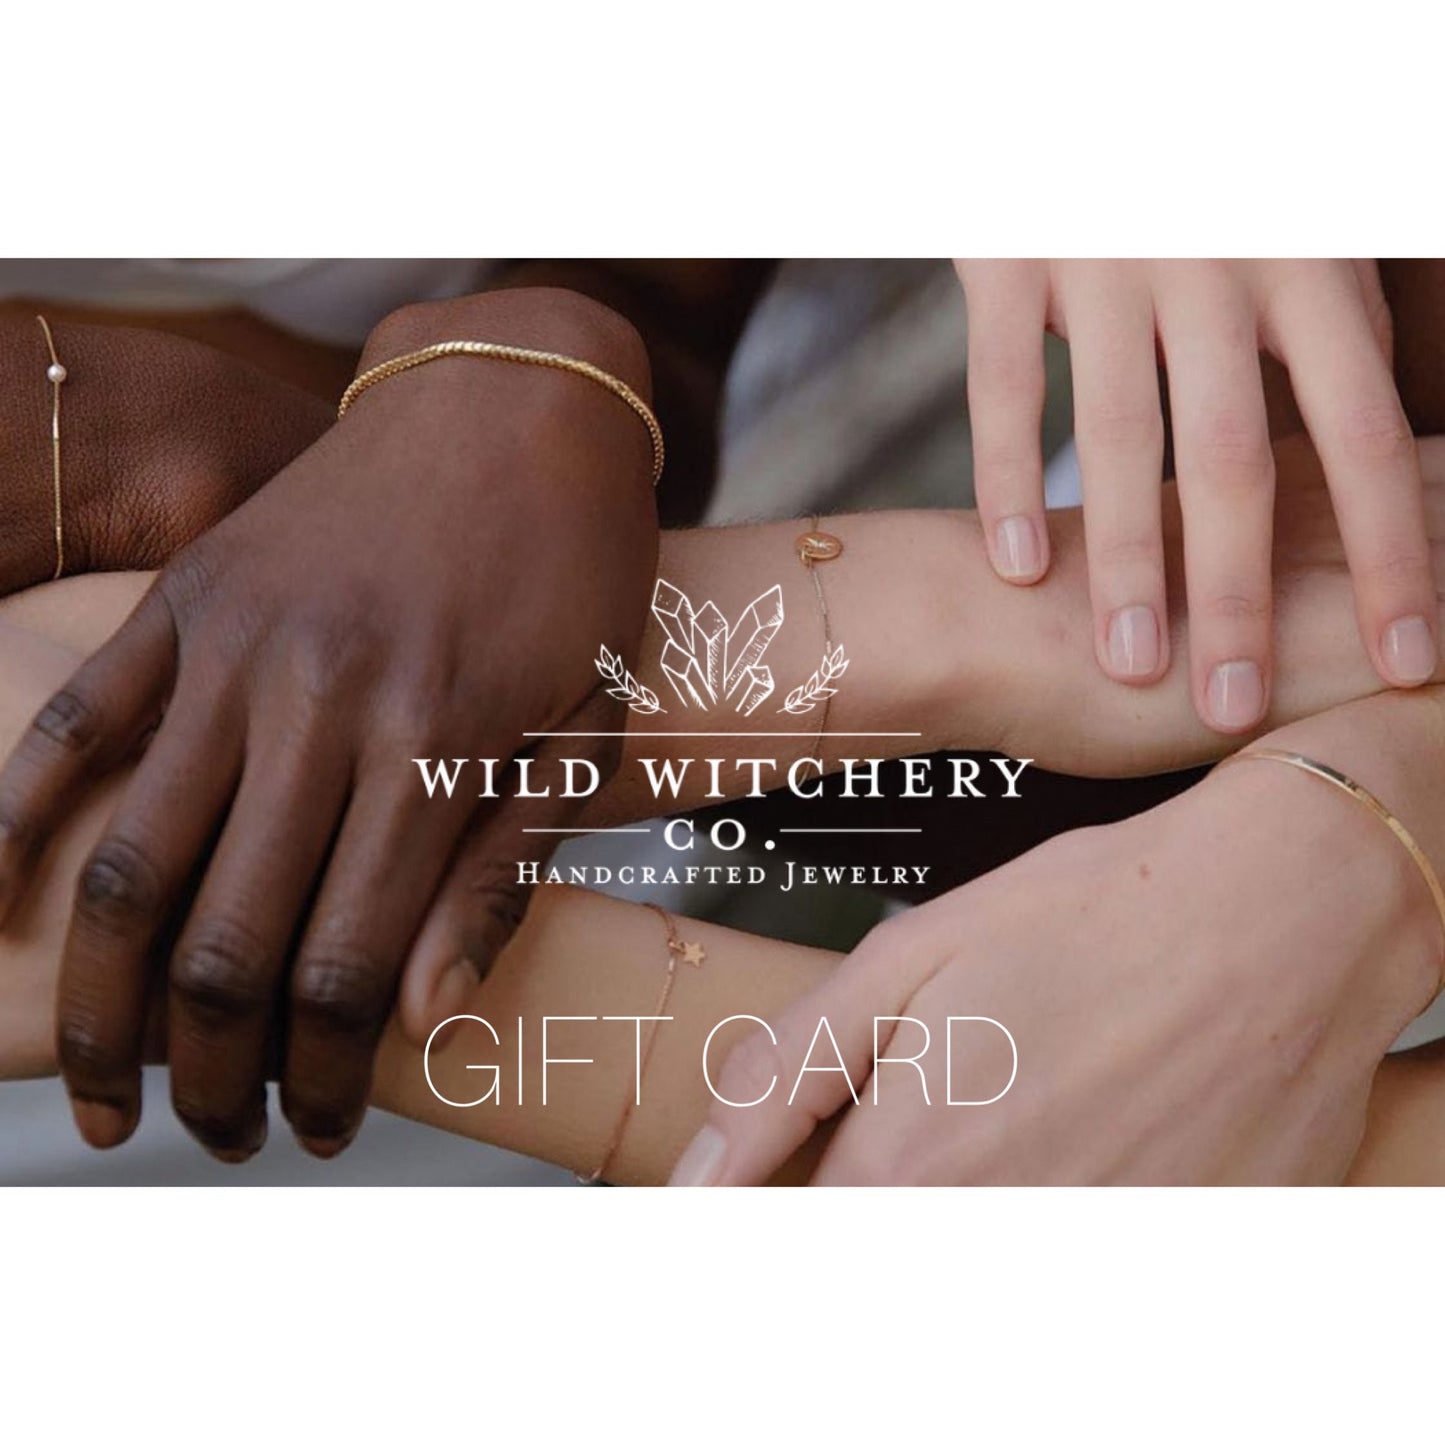 Wild Witchery Co. Gift Card